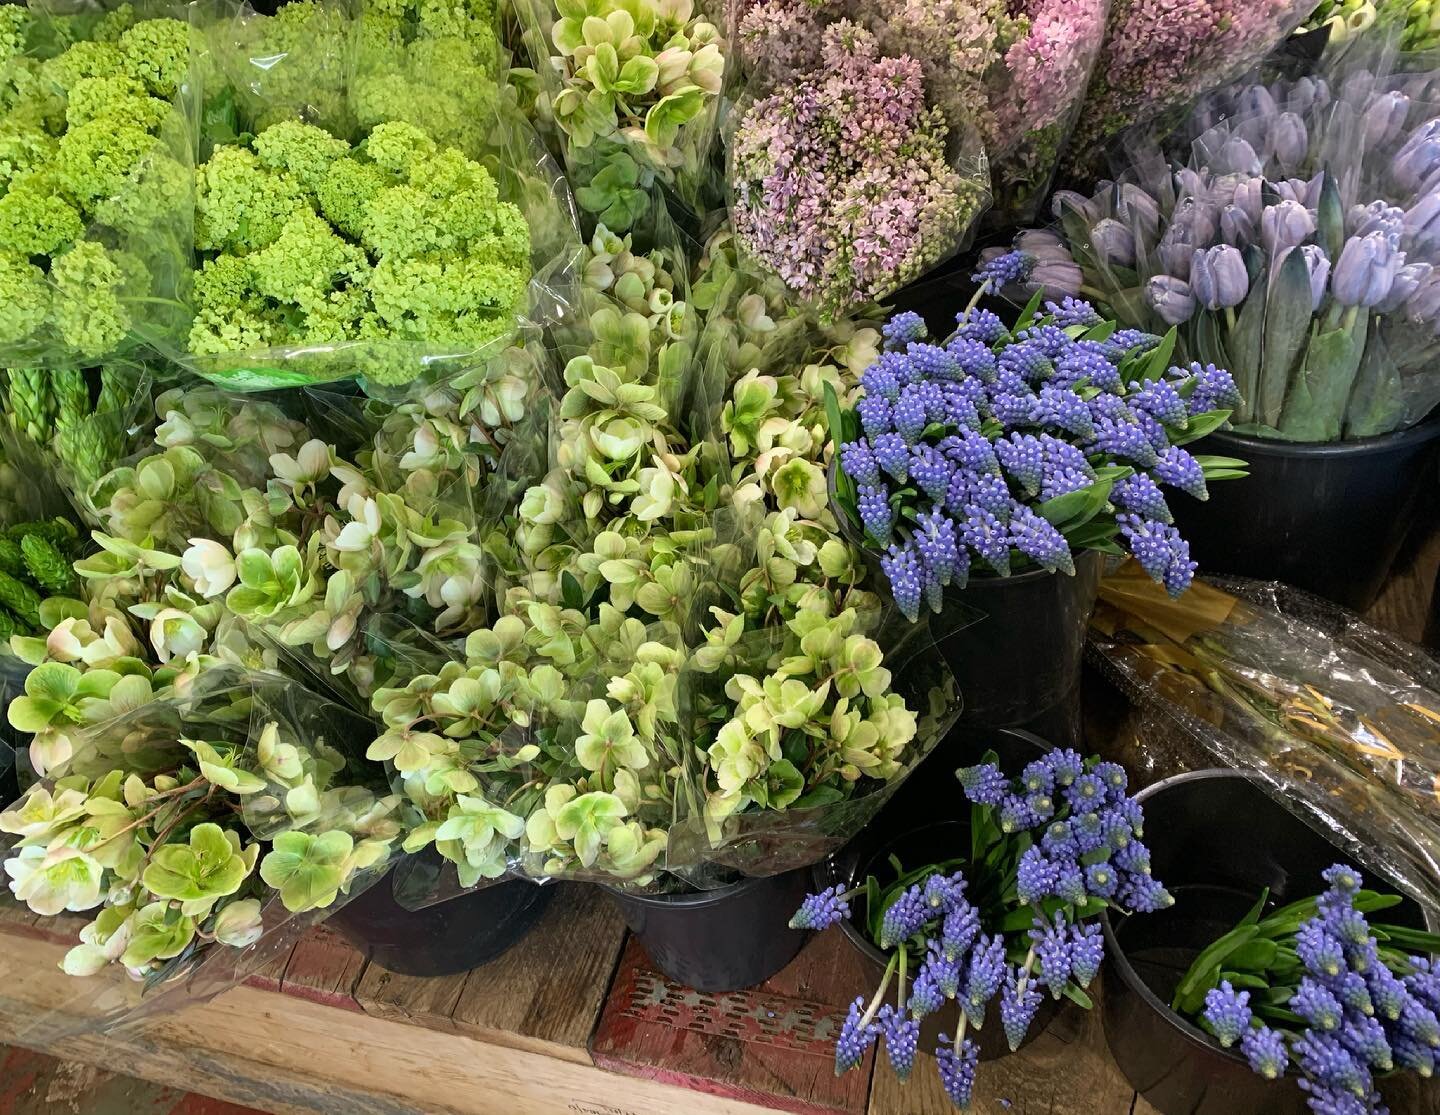 Pairings are my thing! Blue tinted Tulips, Muscari, Eryngium and Lavender Lilac! Or how about Viburnum with Hellebores and White Star Ornithogalum 😍 So good So good SO GOOD!
#directflowers2florist